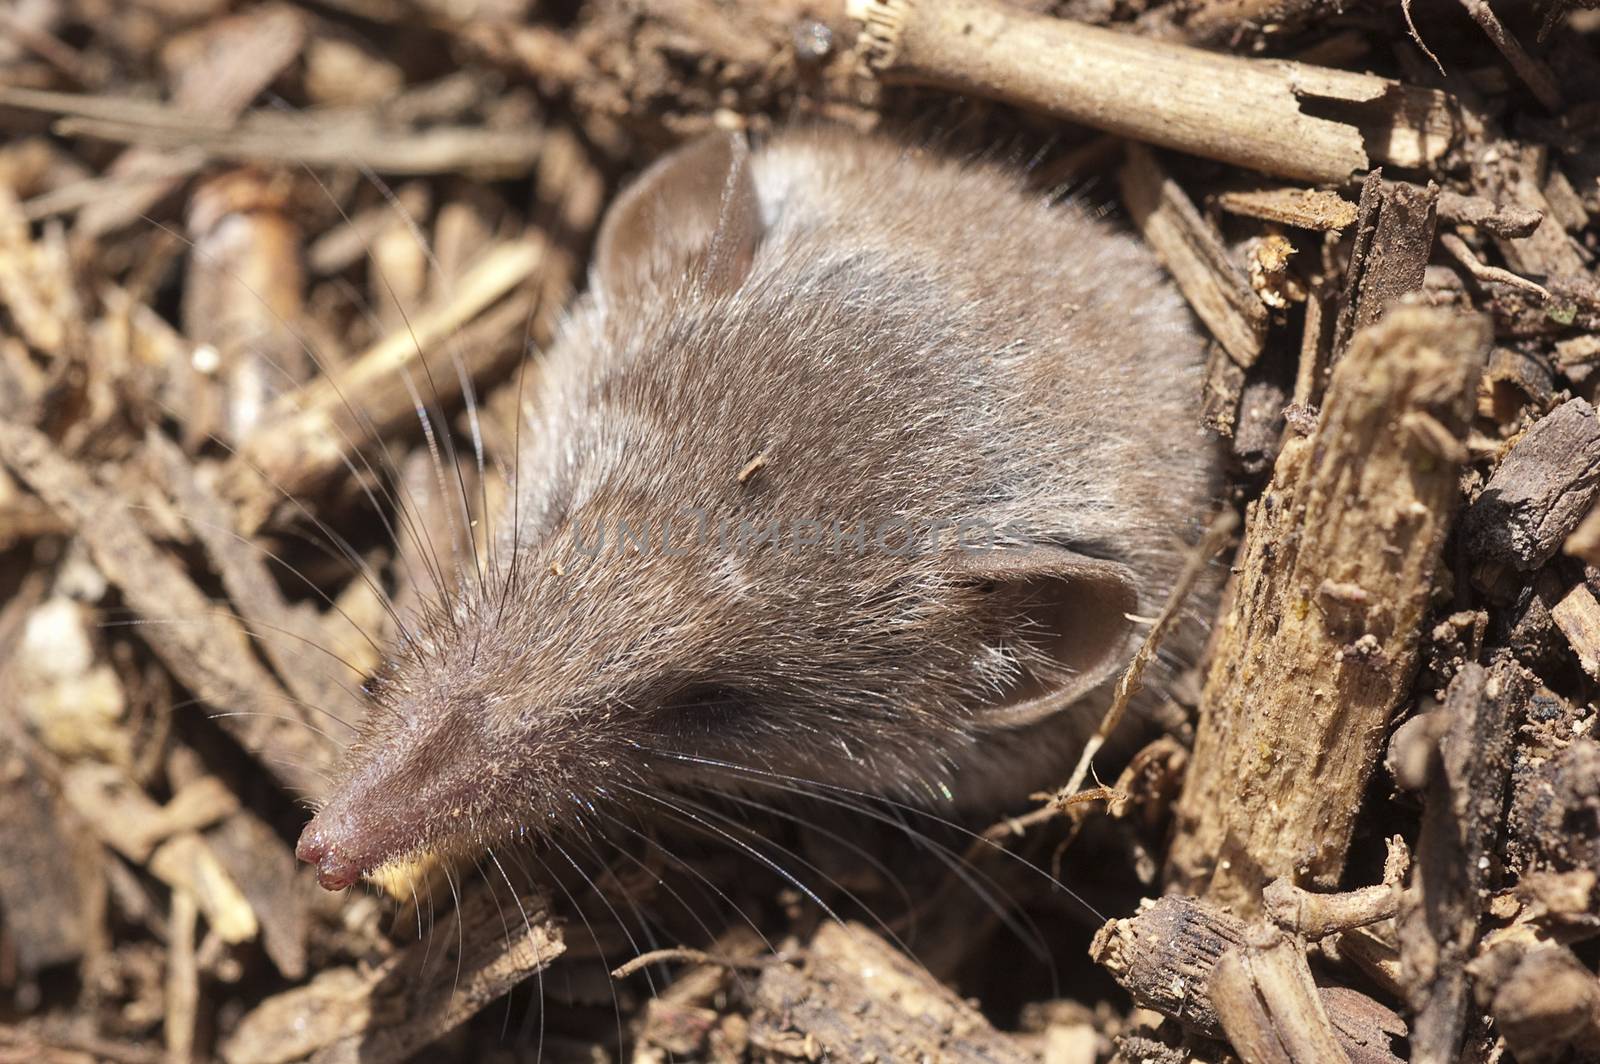 Greater shrew with white teeth (Crocidura russula) coming out of hiding